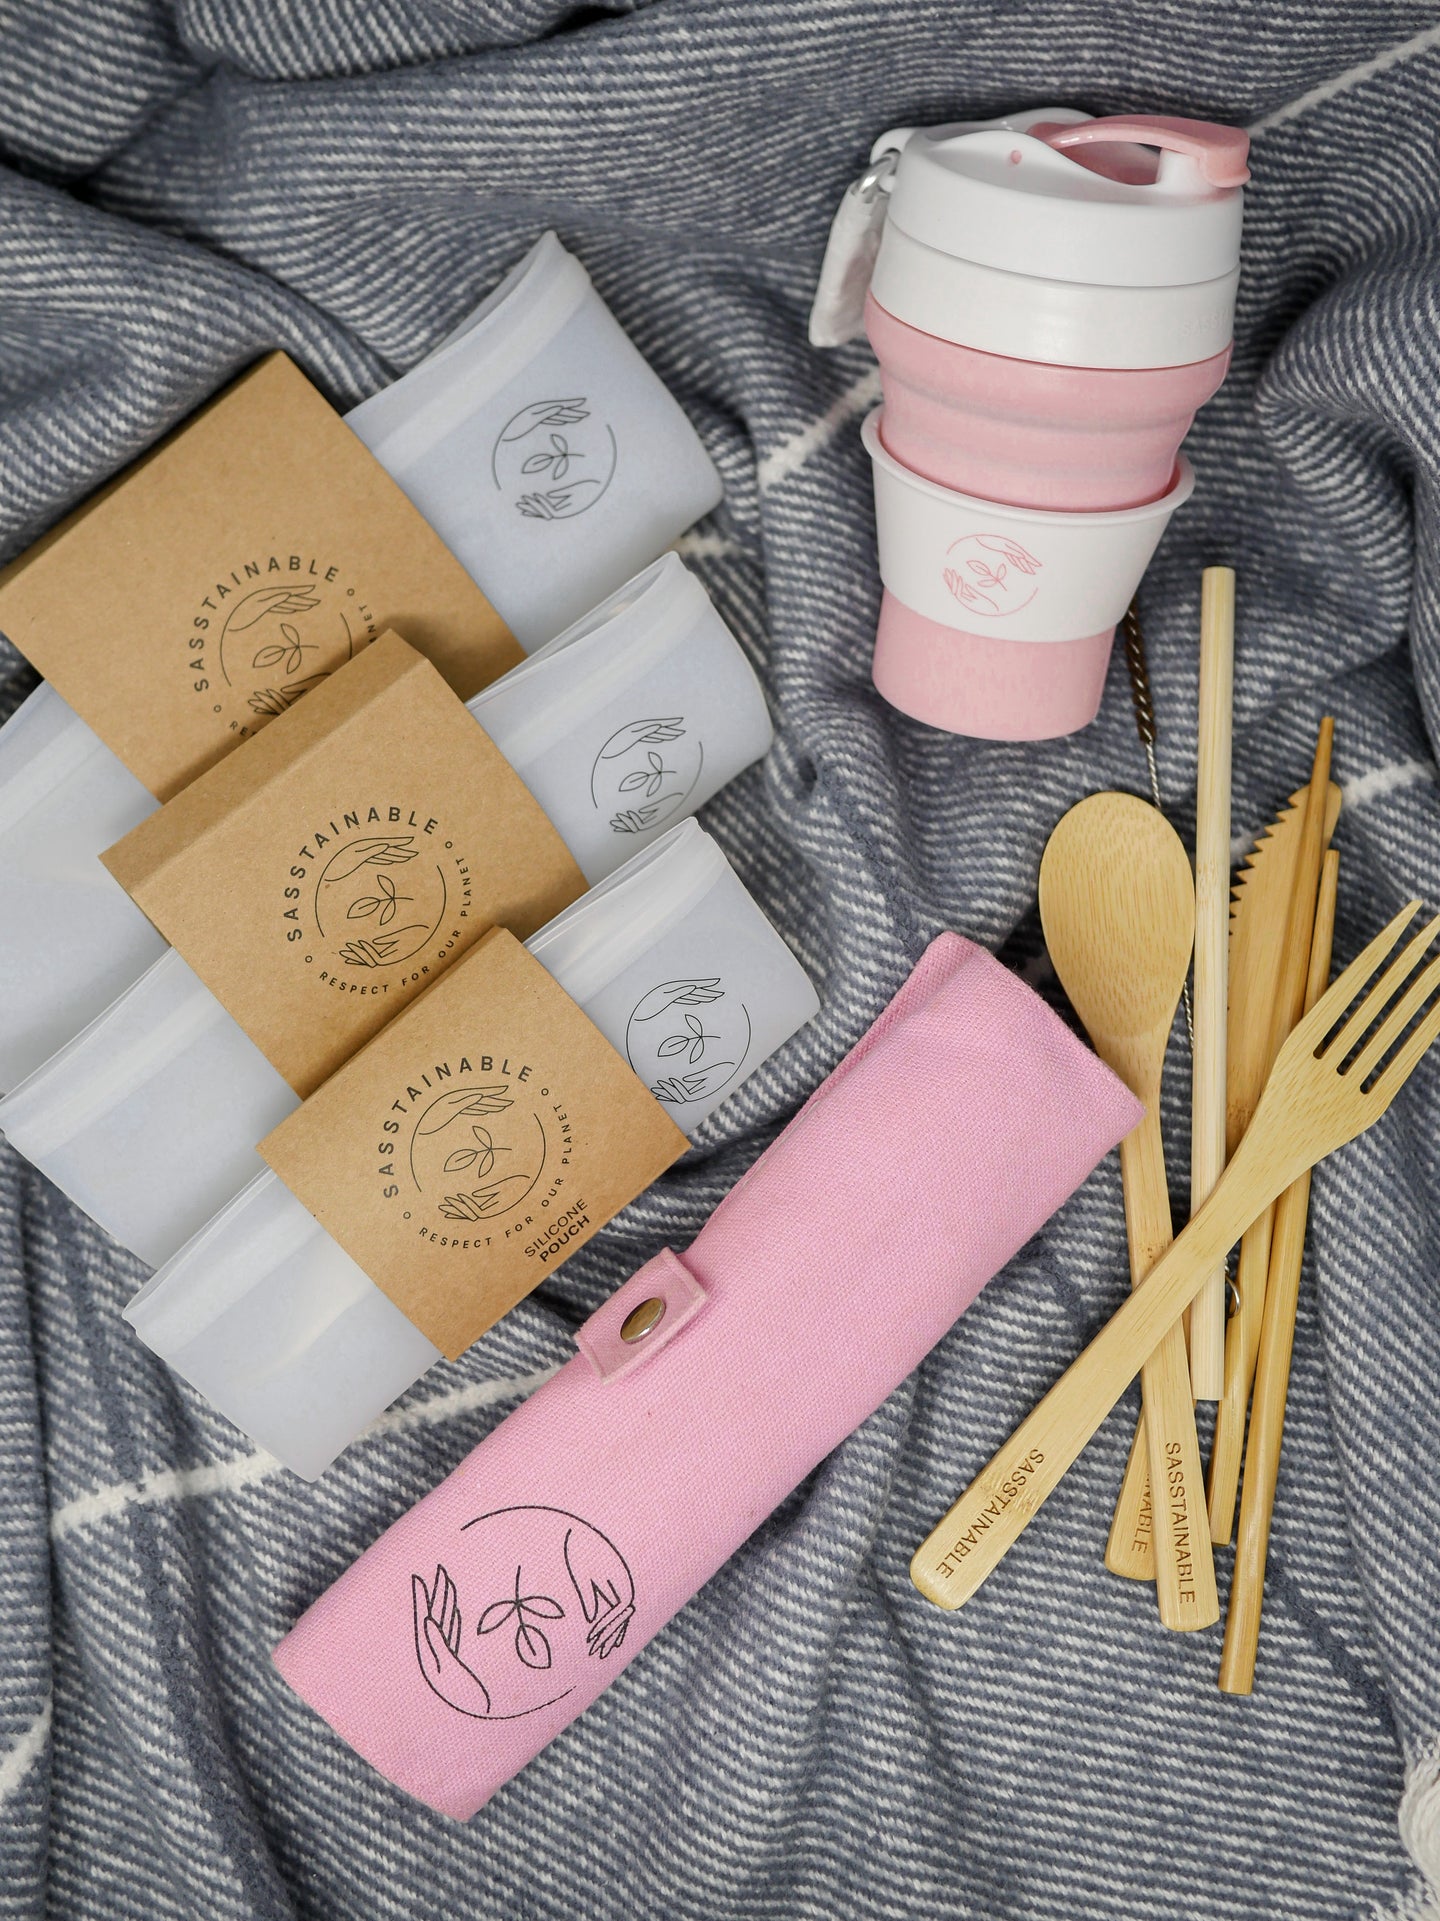 Three silicone pouches, a bamboo cutlery set, a pink cutlery case and pink silicone reusable cup on a blue cloth